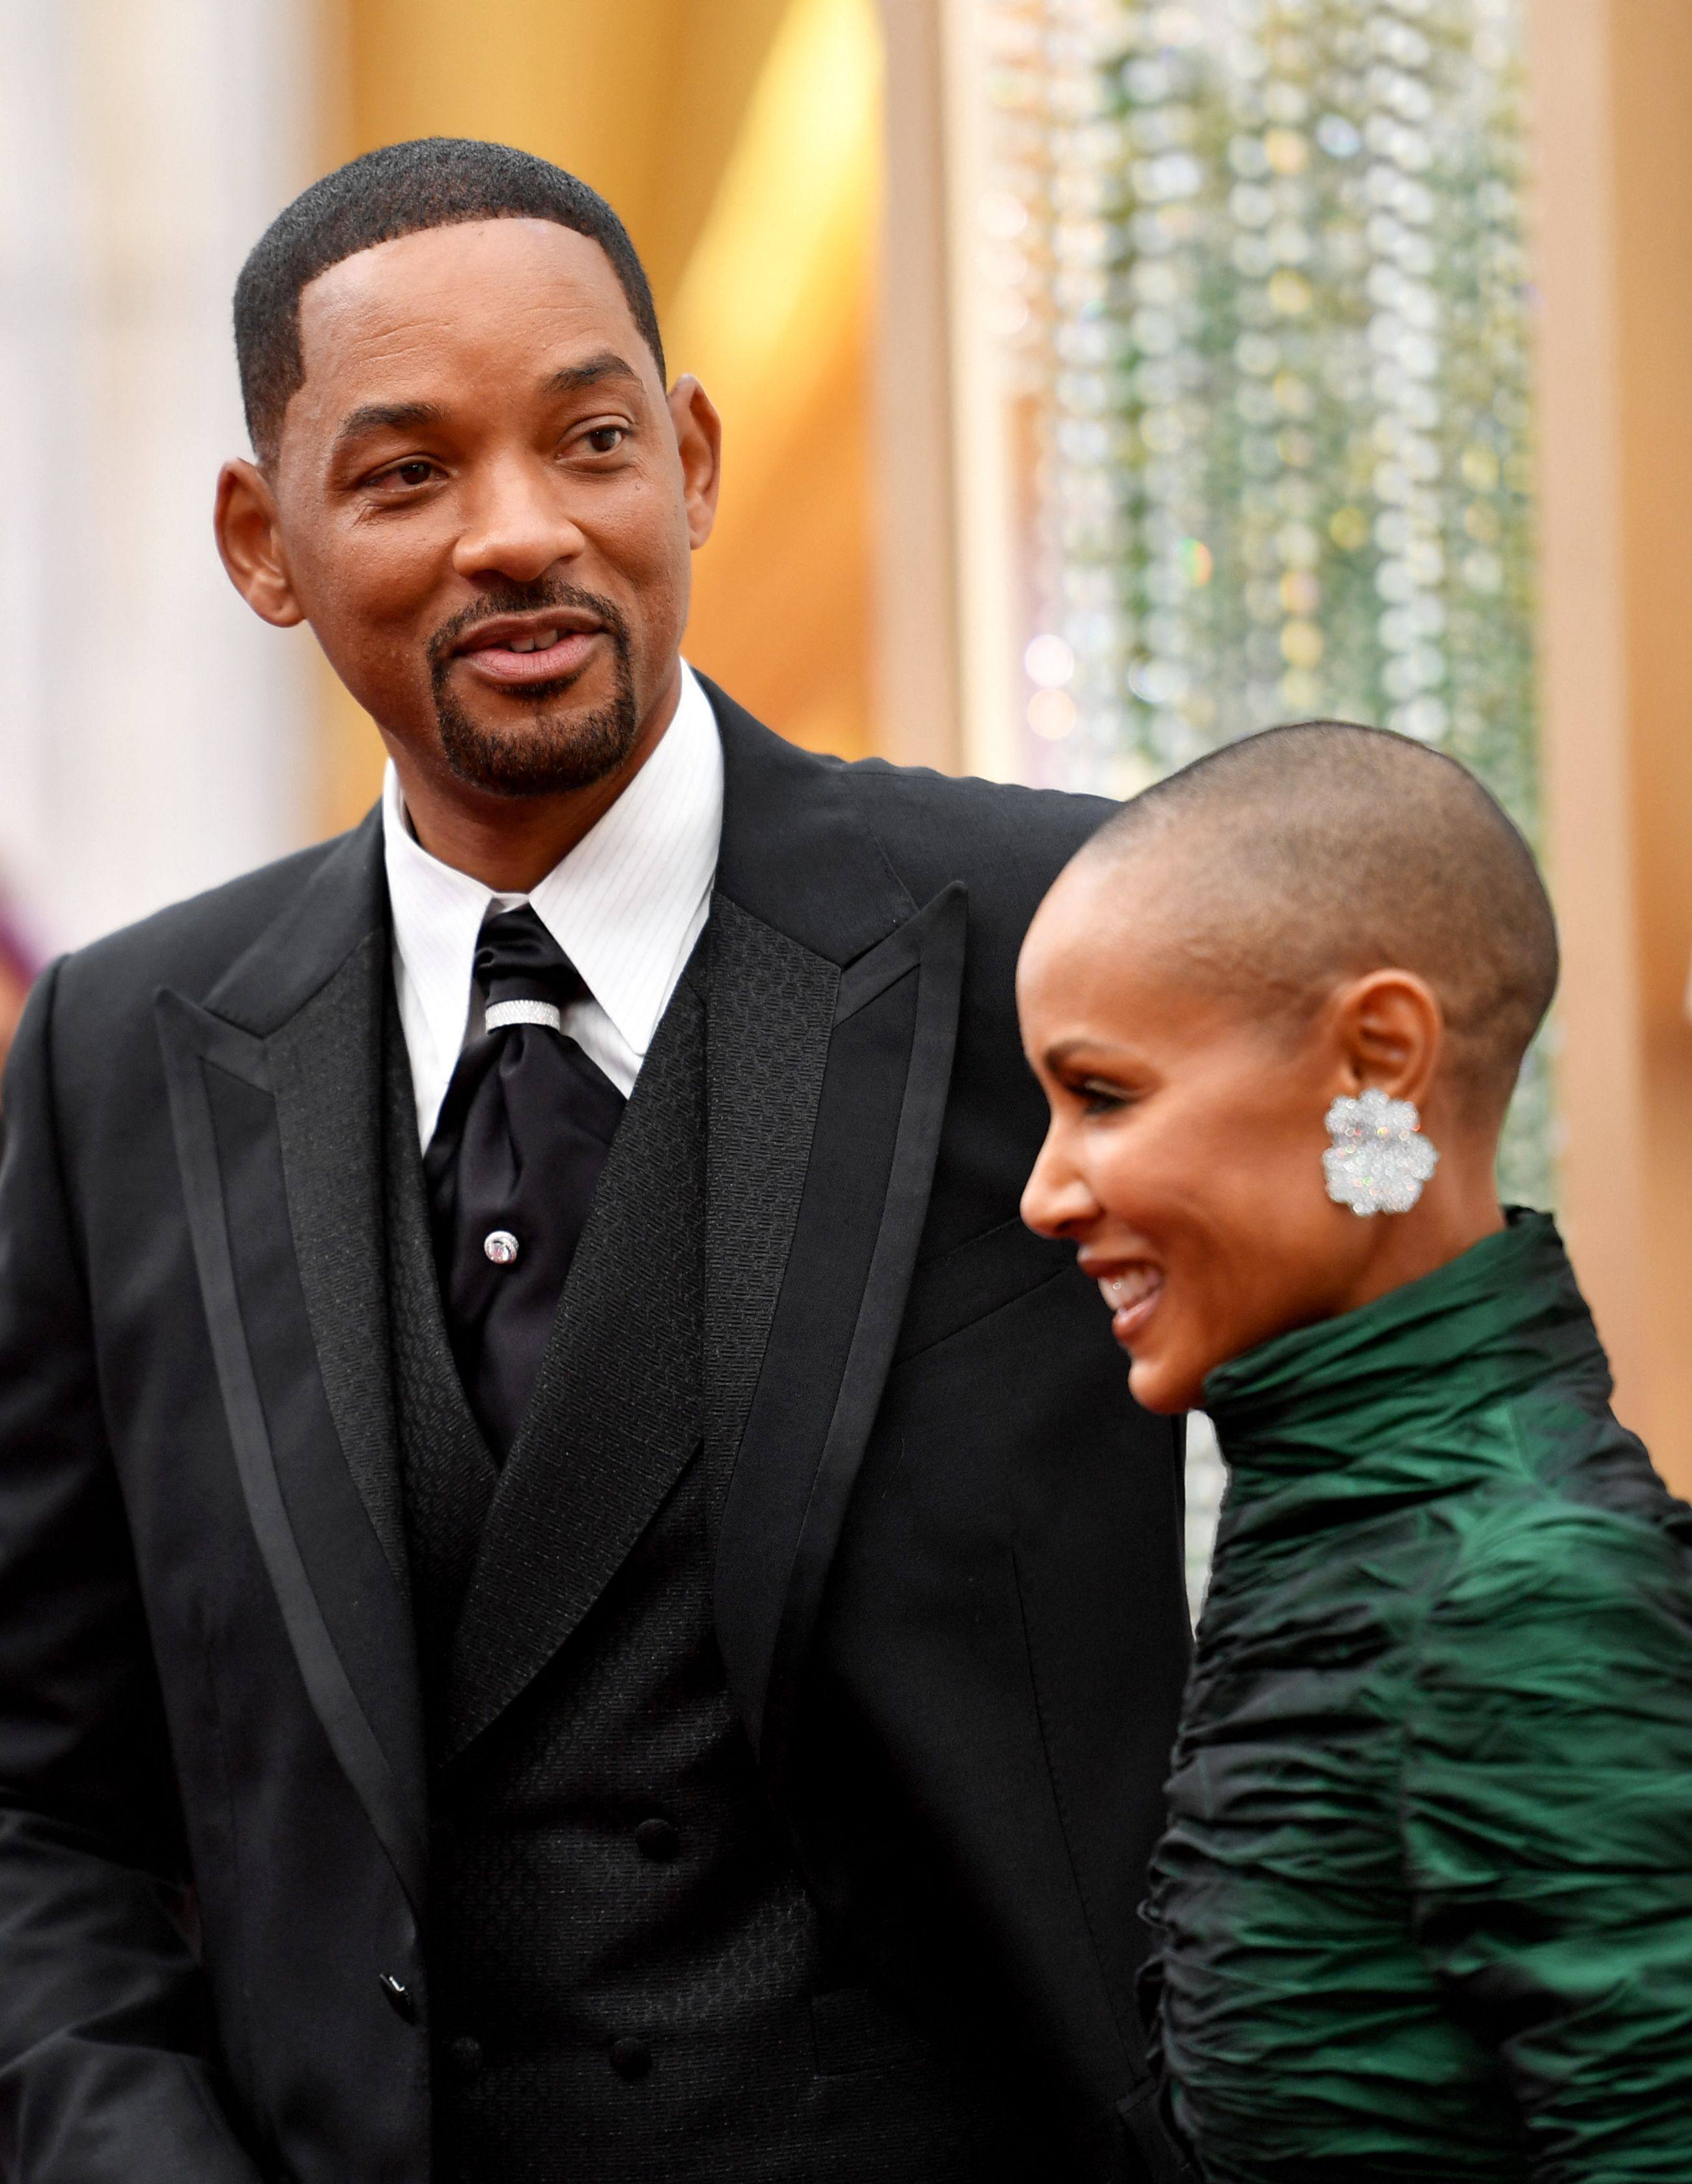 Jada Pinkett Smith’s alopecia was brought sharply into the public eye at the   94th Oscars. Photo: Angela Weiss/AFP